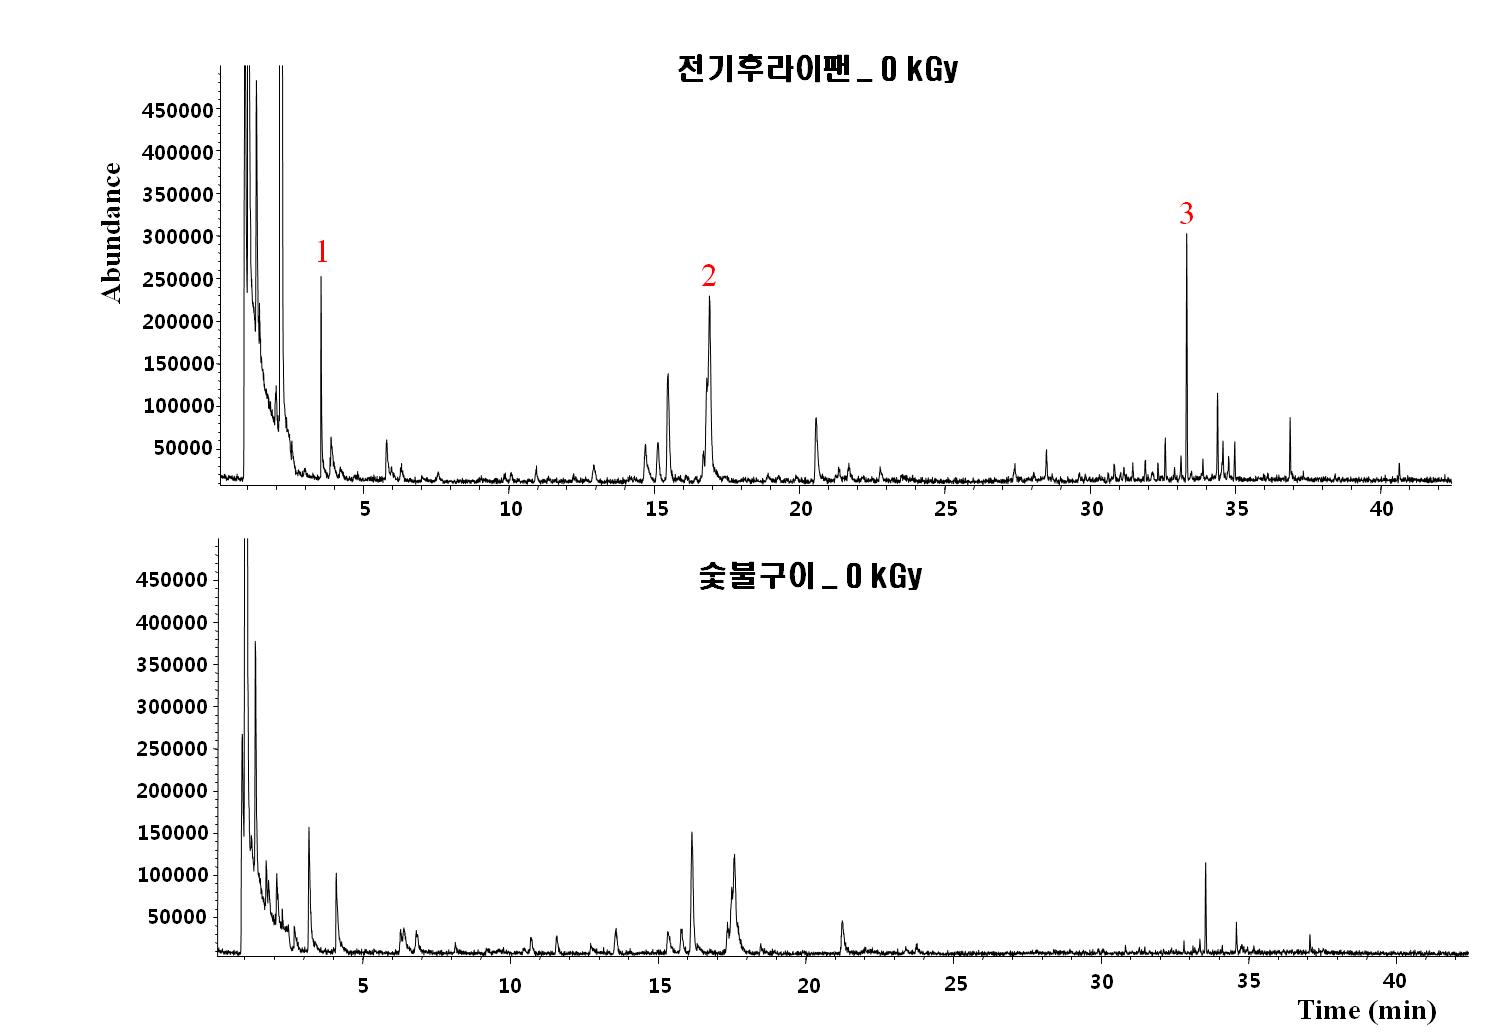 Comparison of chromatograph of dakgalbi using charcoal and electronic pan.